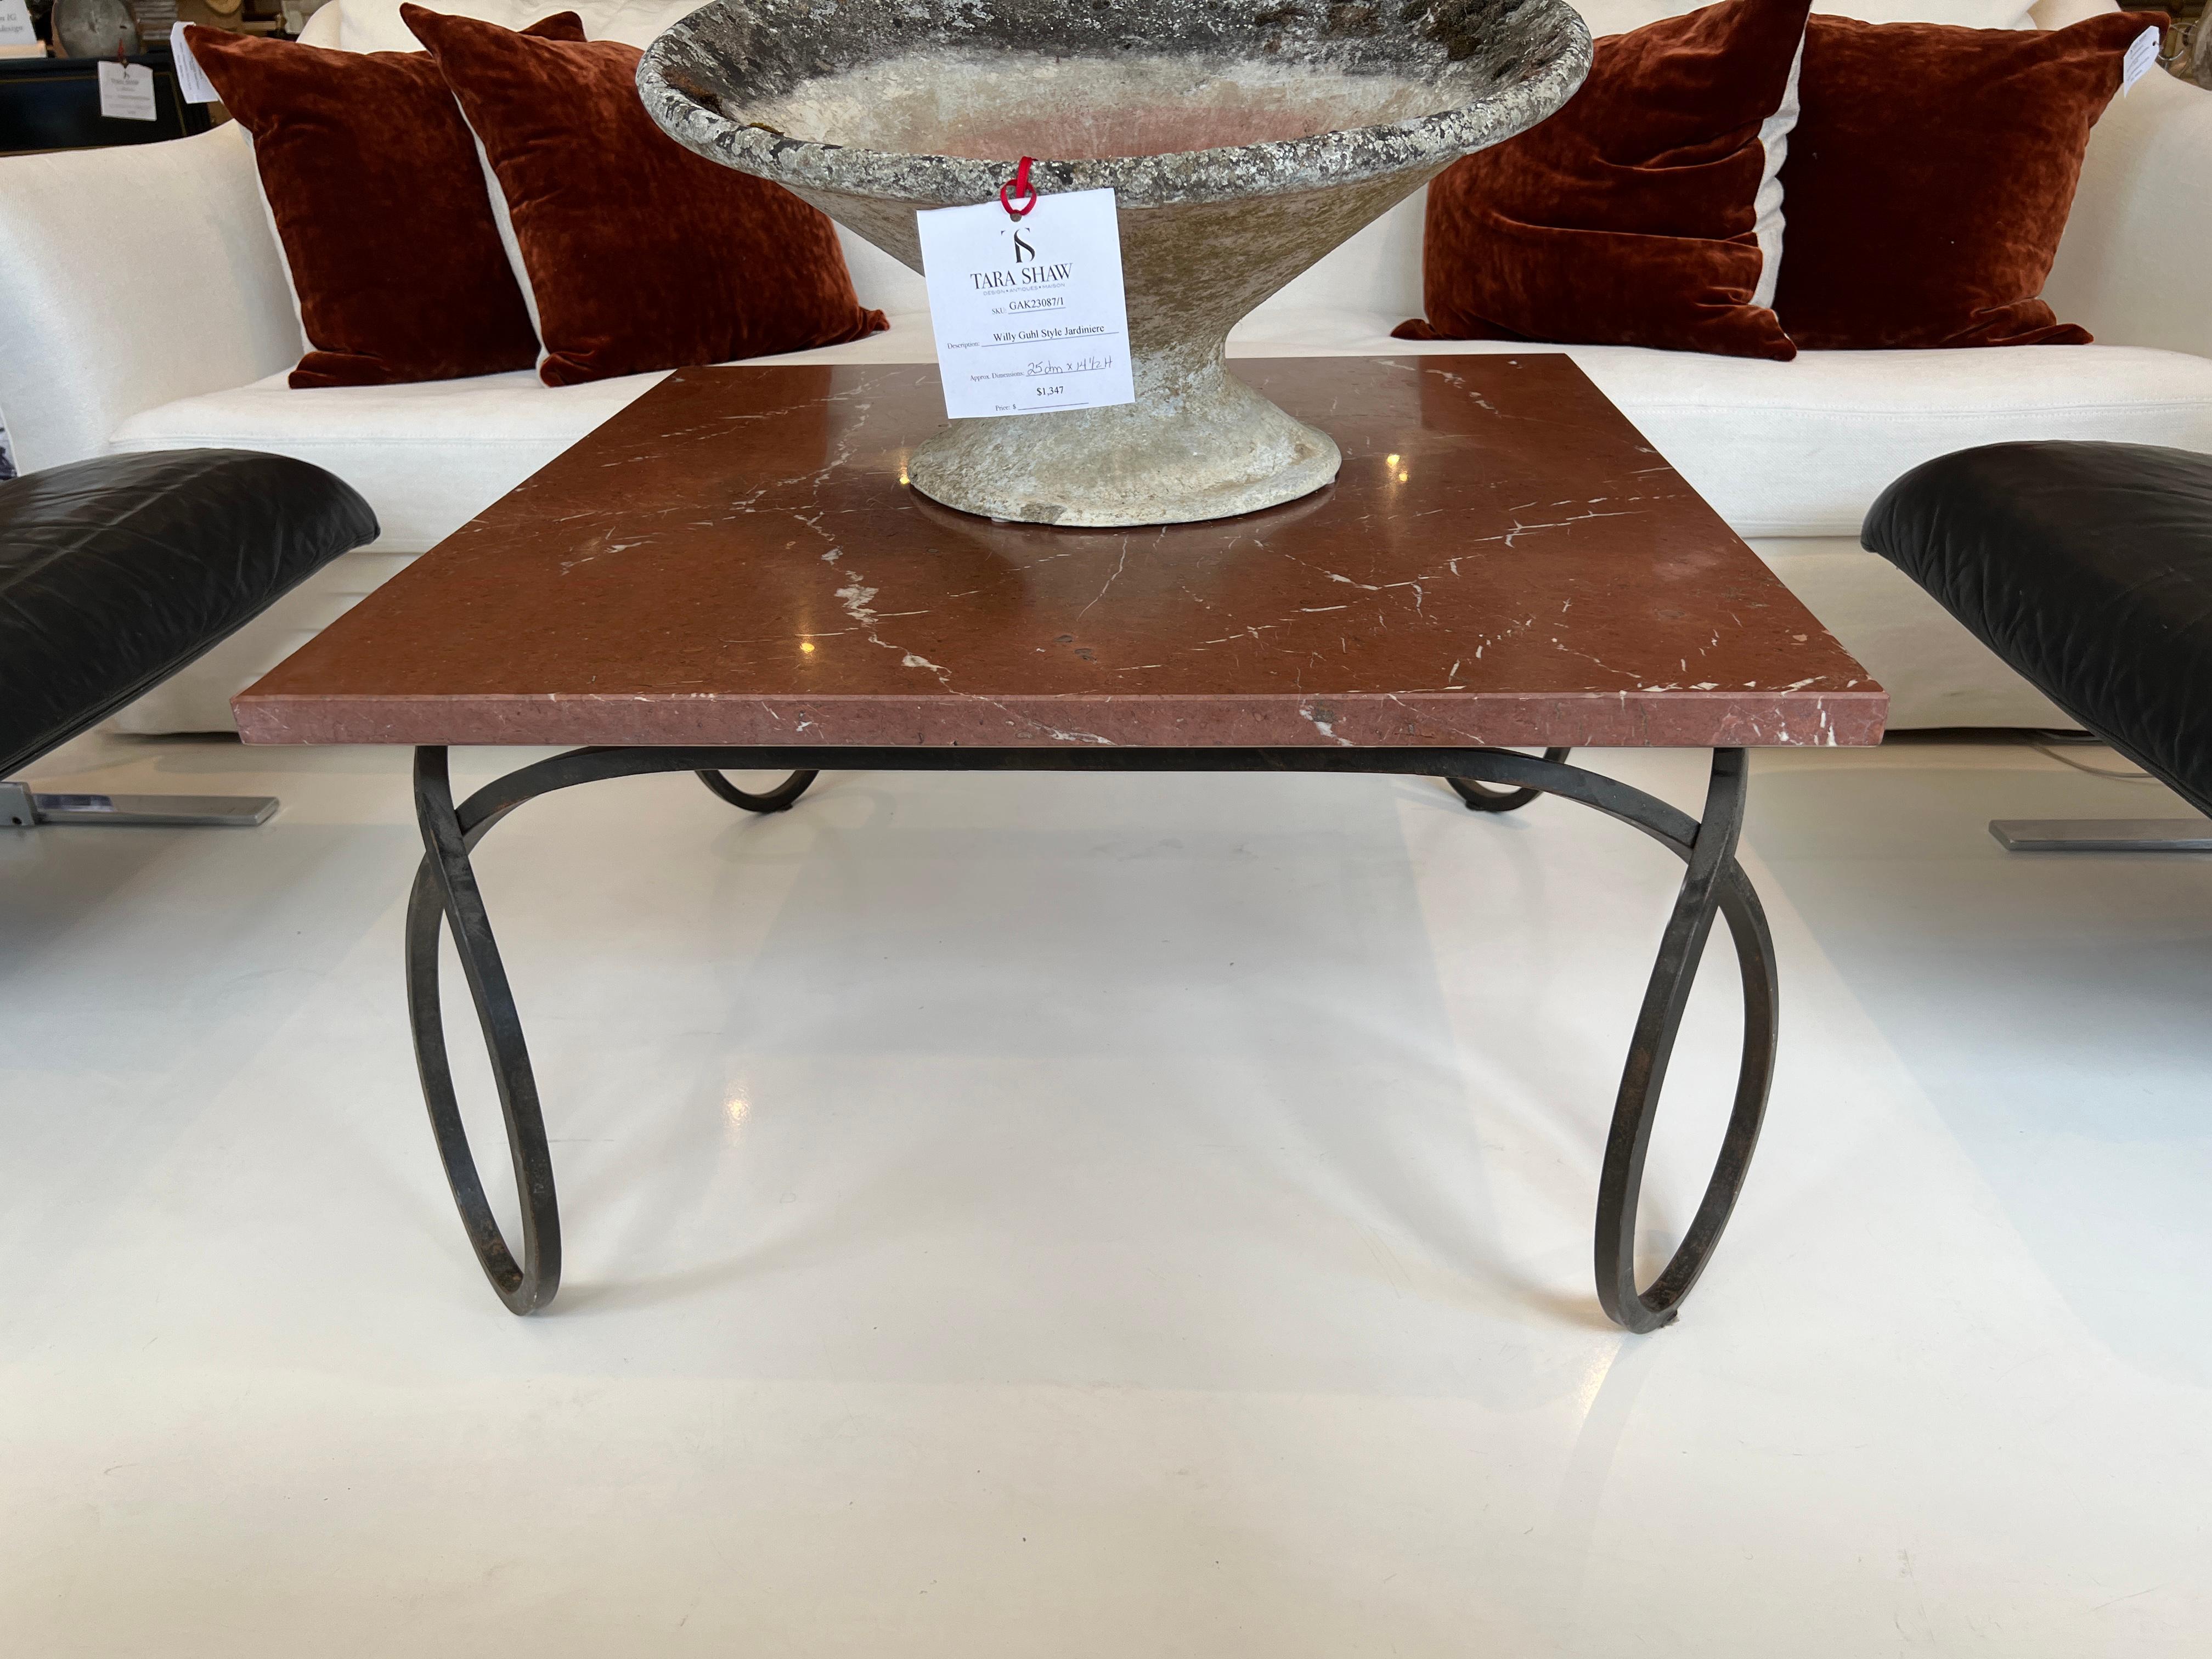 Large looped legs in wrought iron support a handsome slab of red Marble. Beautiful, generously sized statement piece.